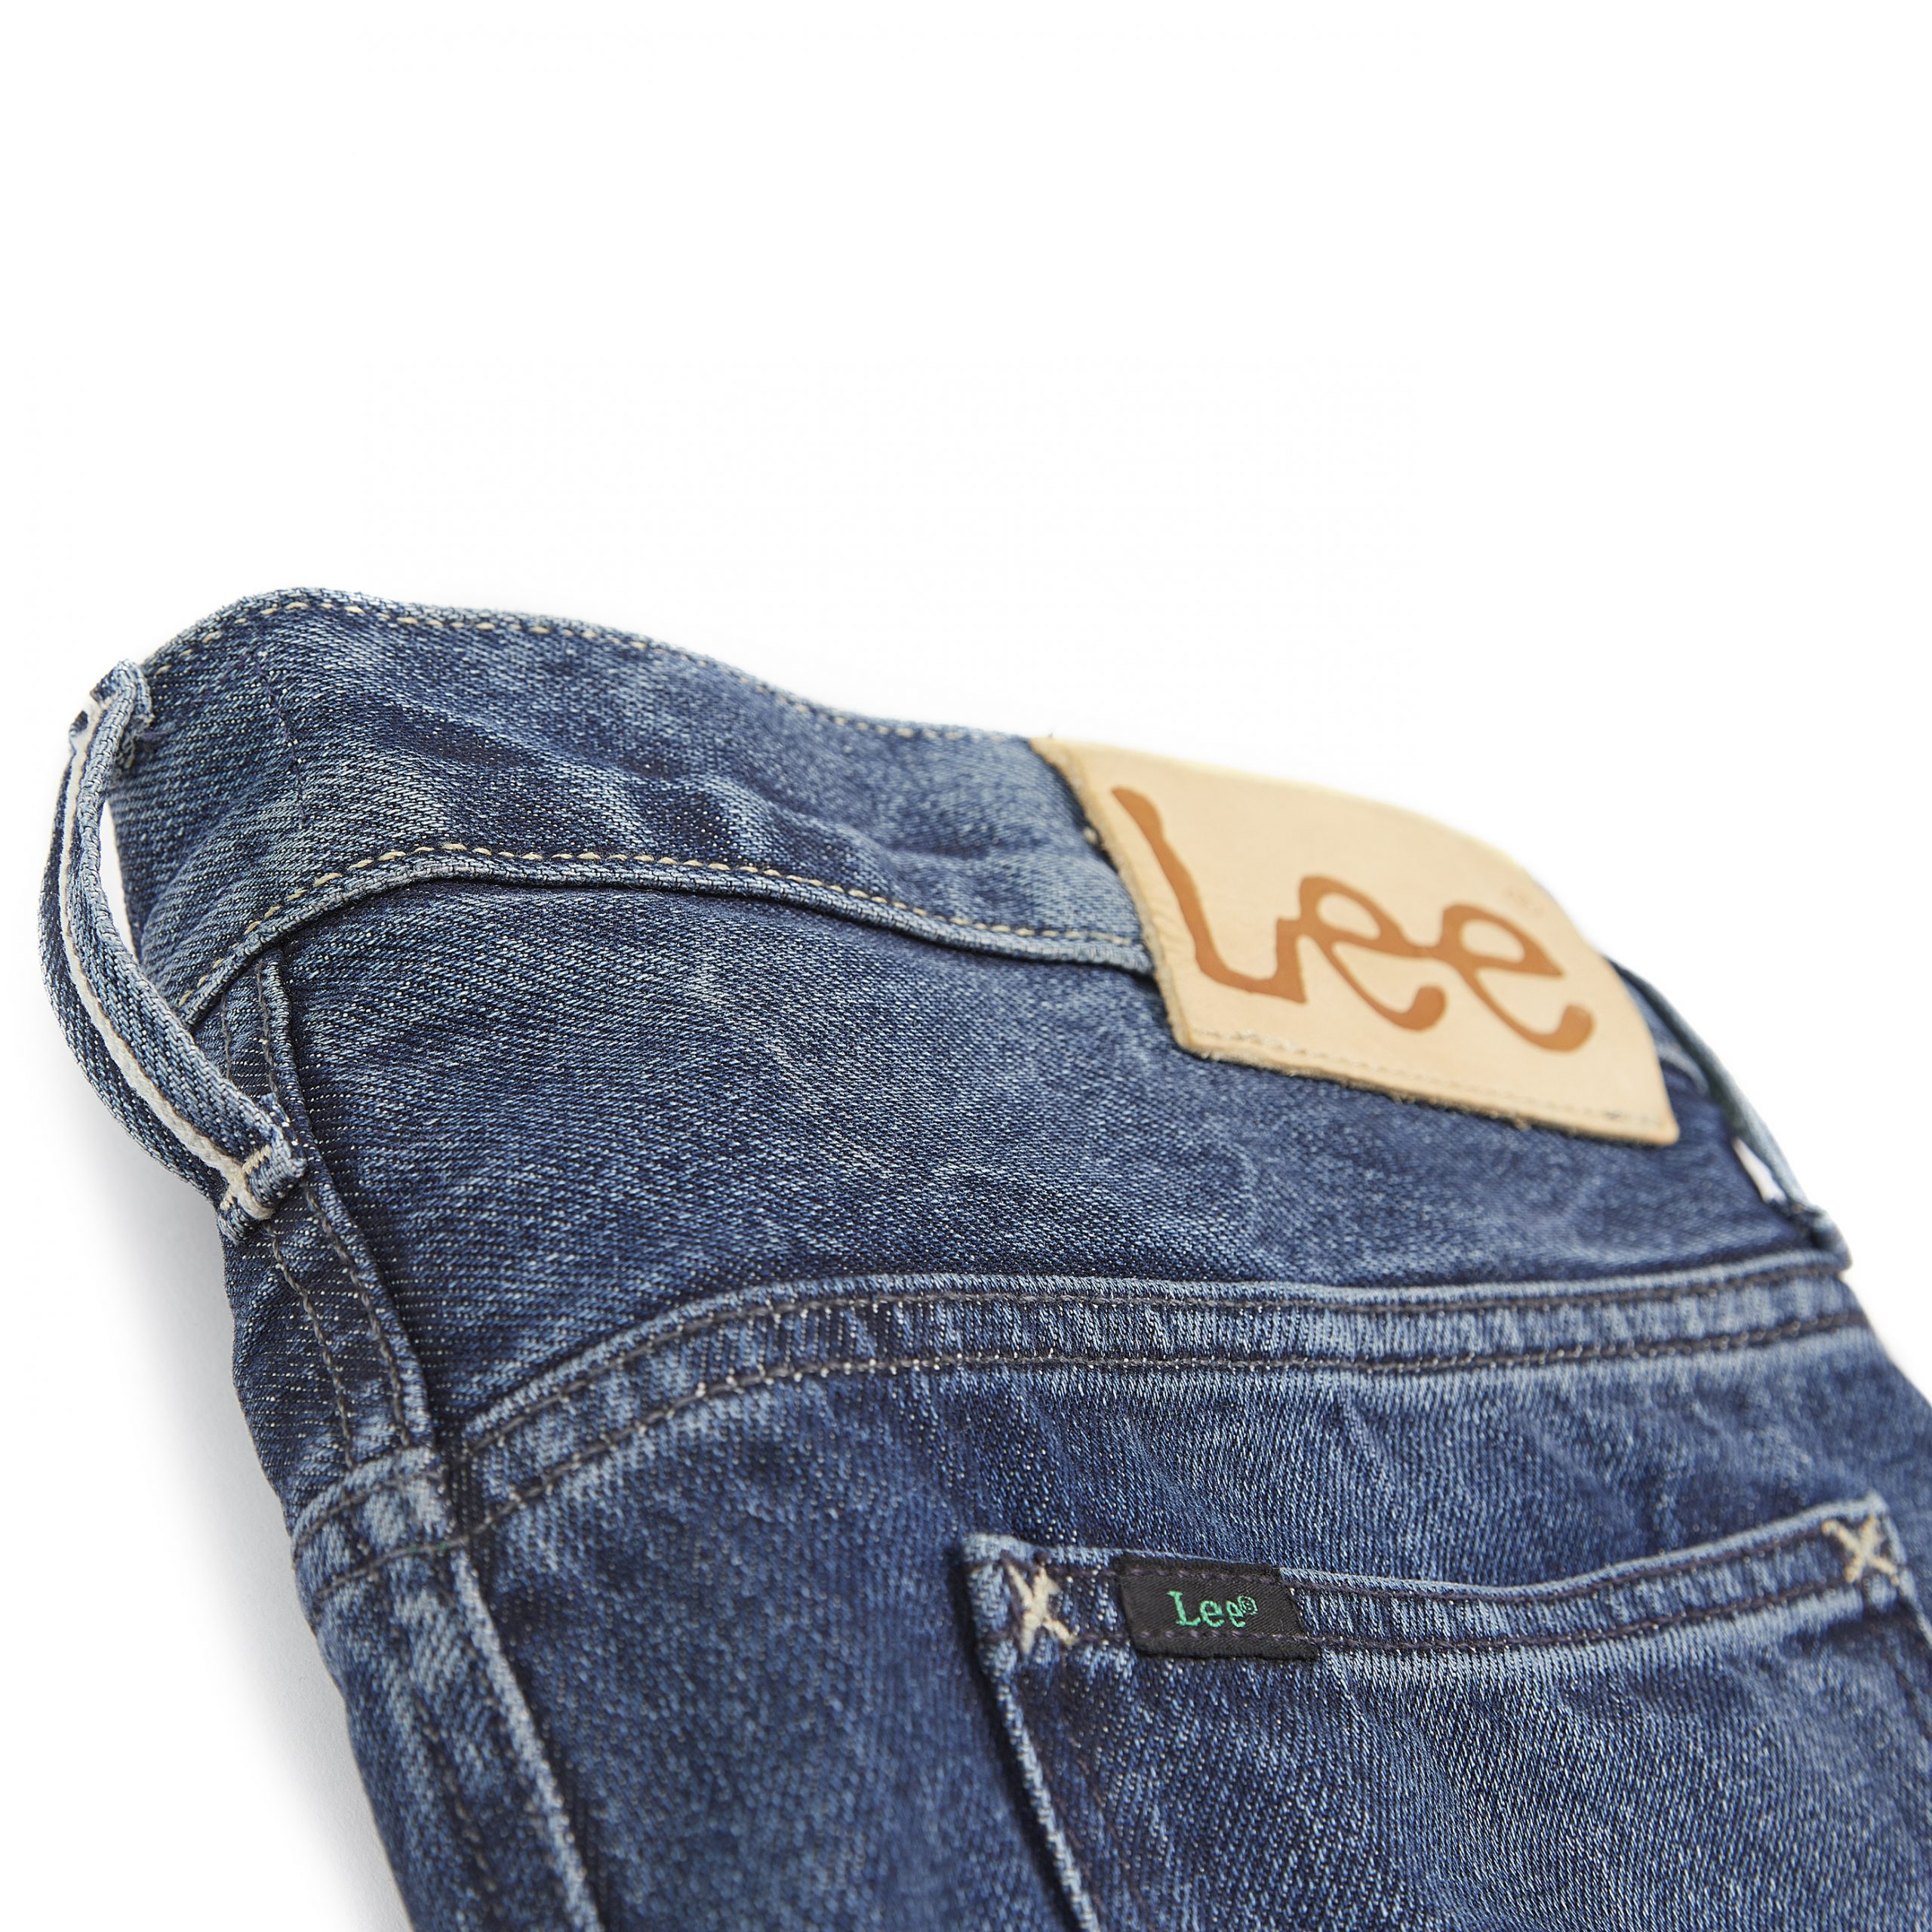 Lee Jeans introduces 'For A World That Works' Initiative